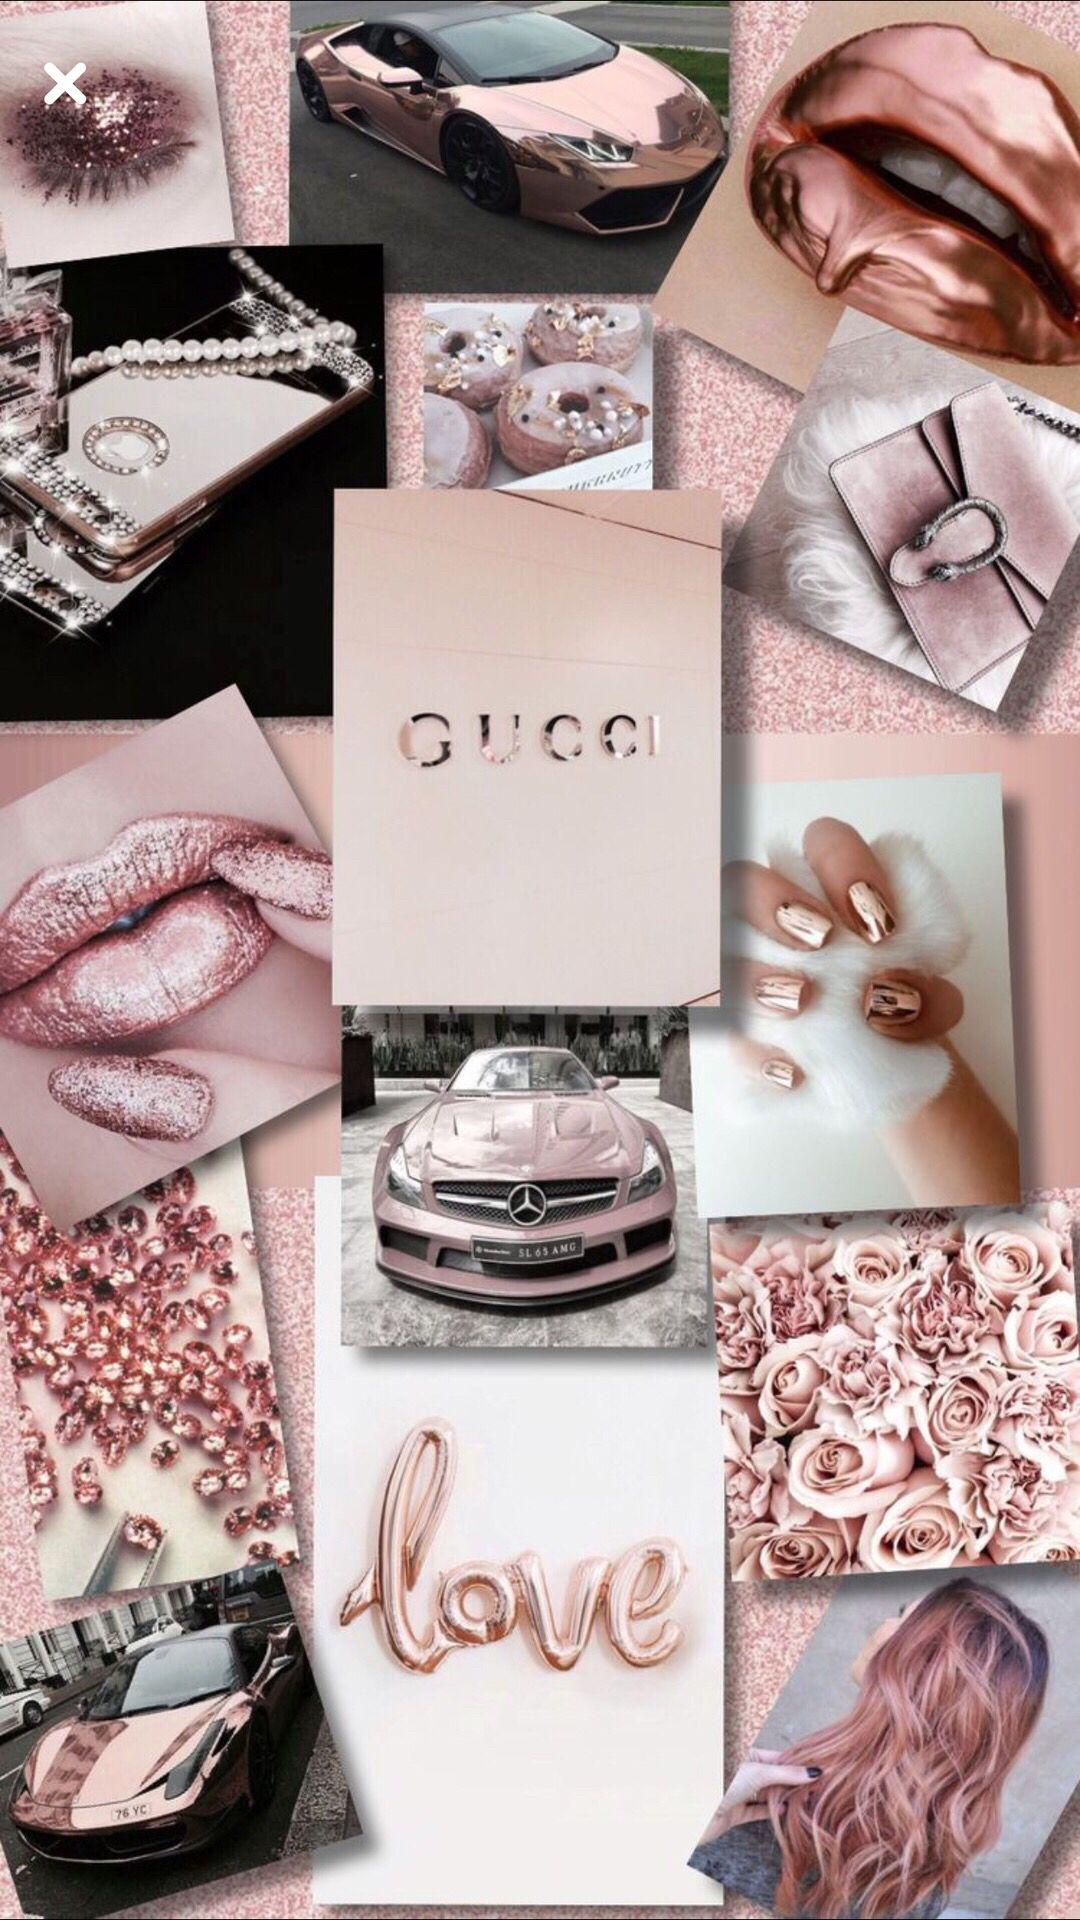 Gucci Aesthetic Wallpaper Free Gucci Aesthetic Background